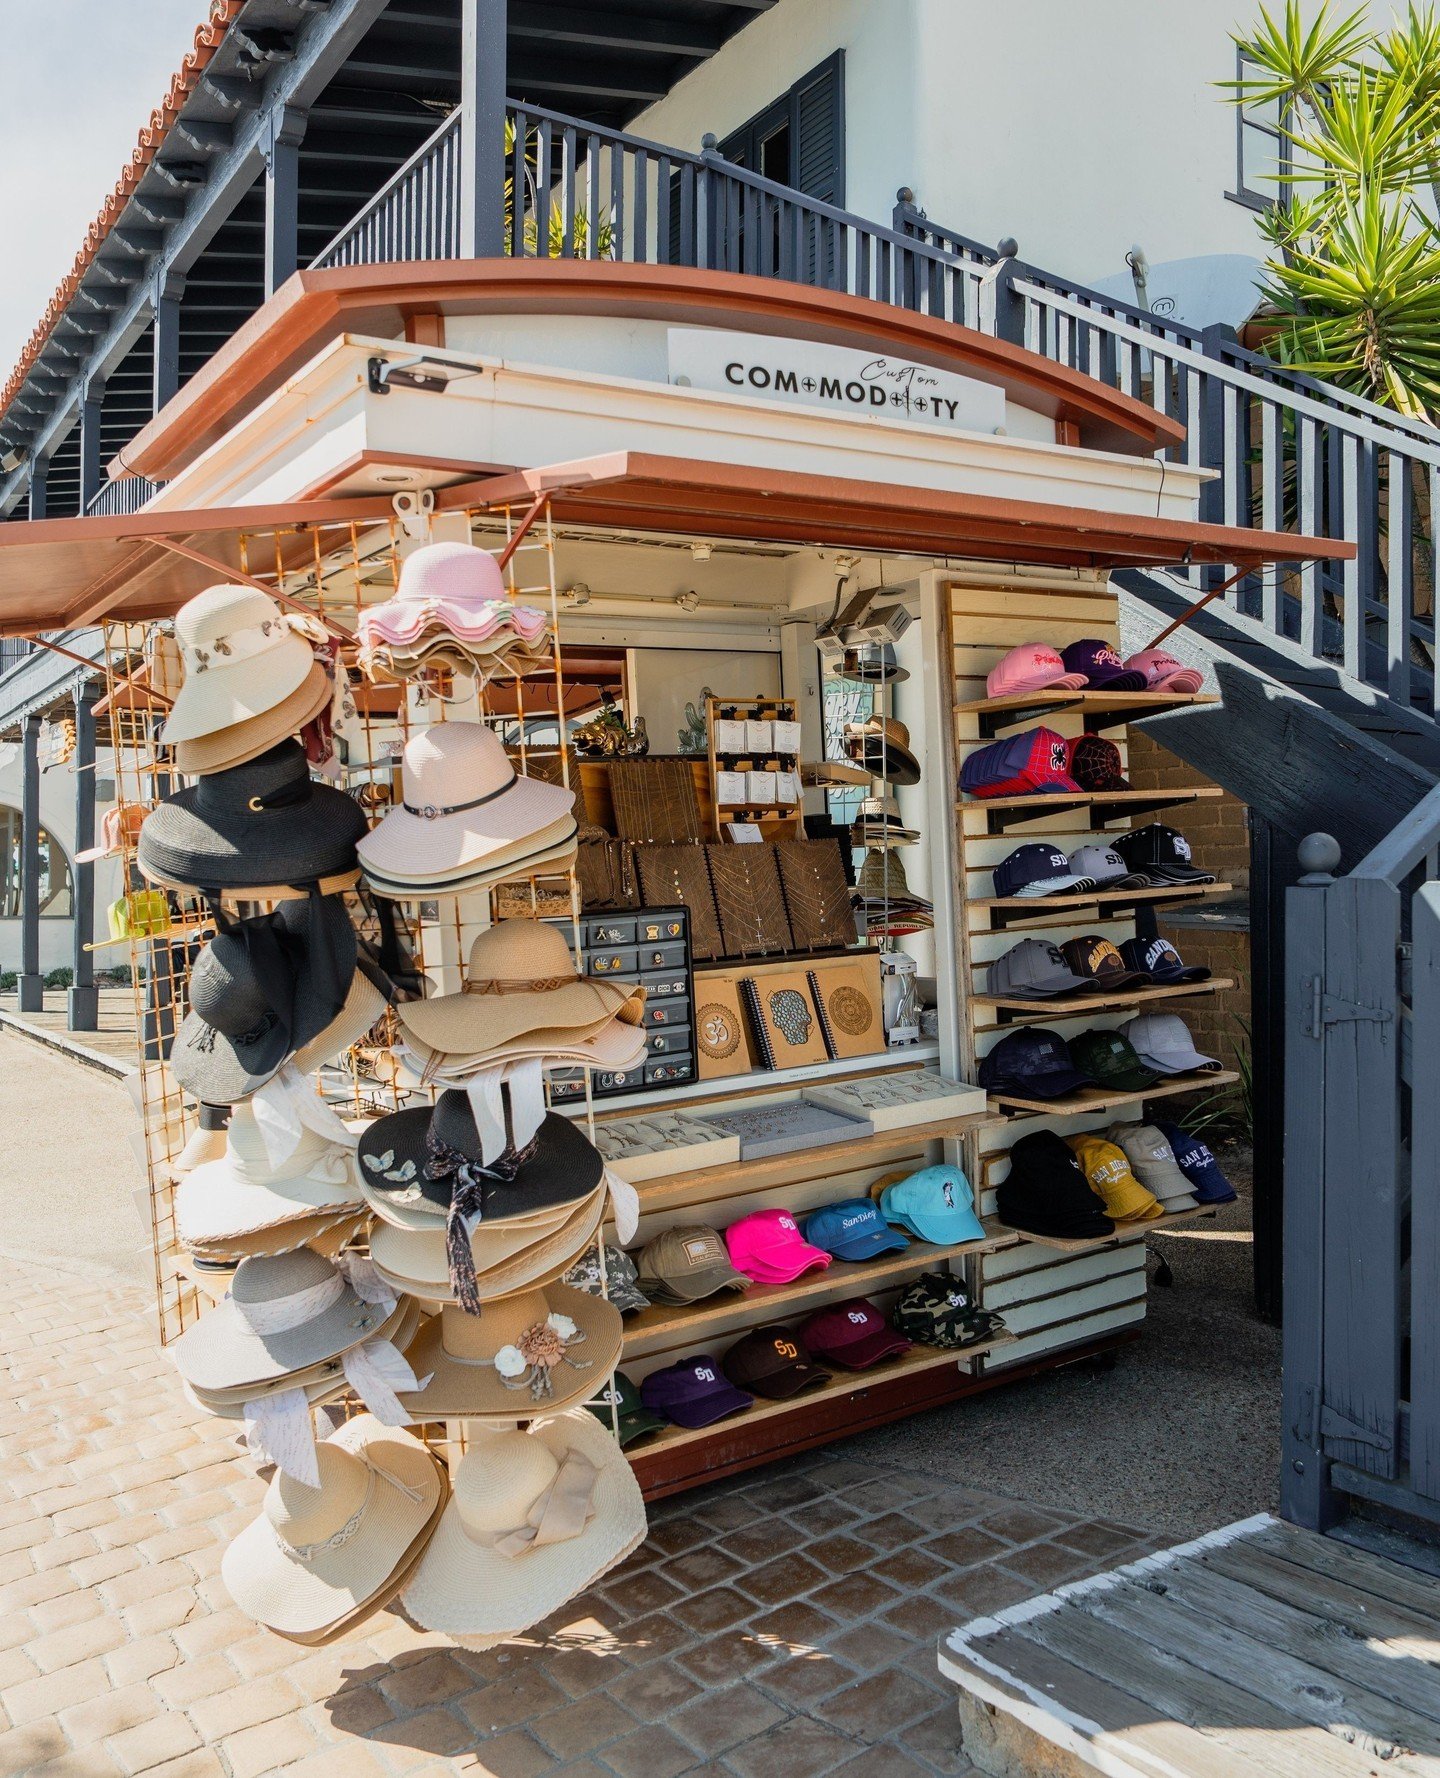 You asked, we answered! Here is part two of where to find unique gifts and trinkets here at Seaport Village. 🛍️ ⁠
⁠
📍Custom Commodity⁠
📍Indian Trail's Gallery⁠
📍Sock Harbor